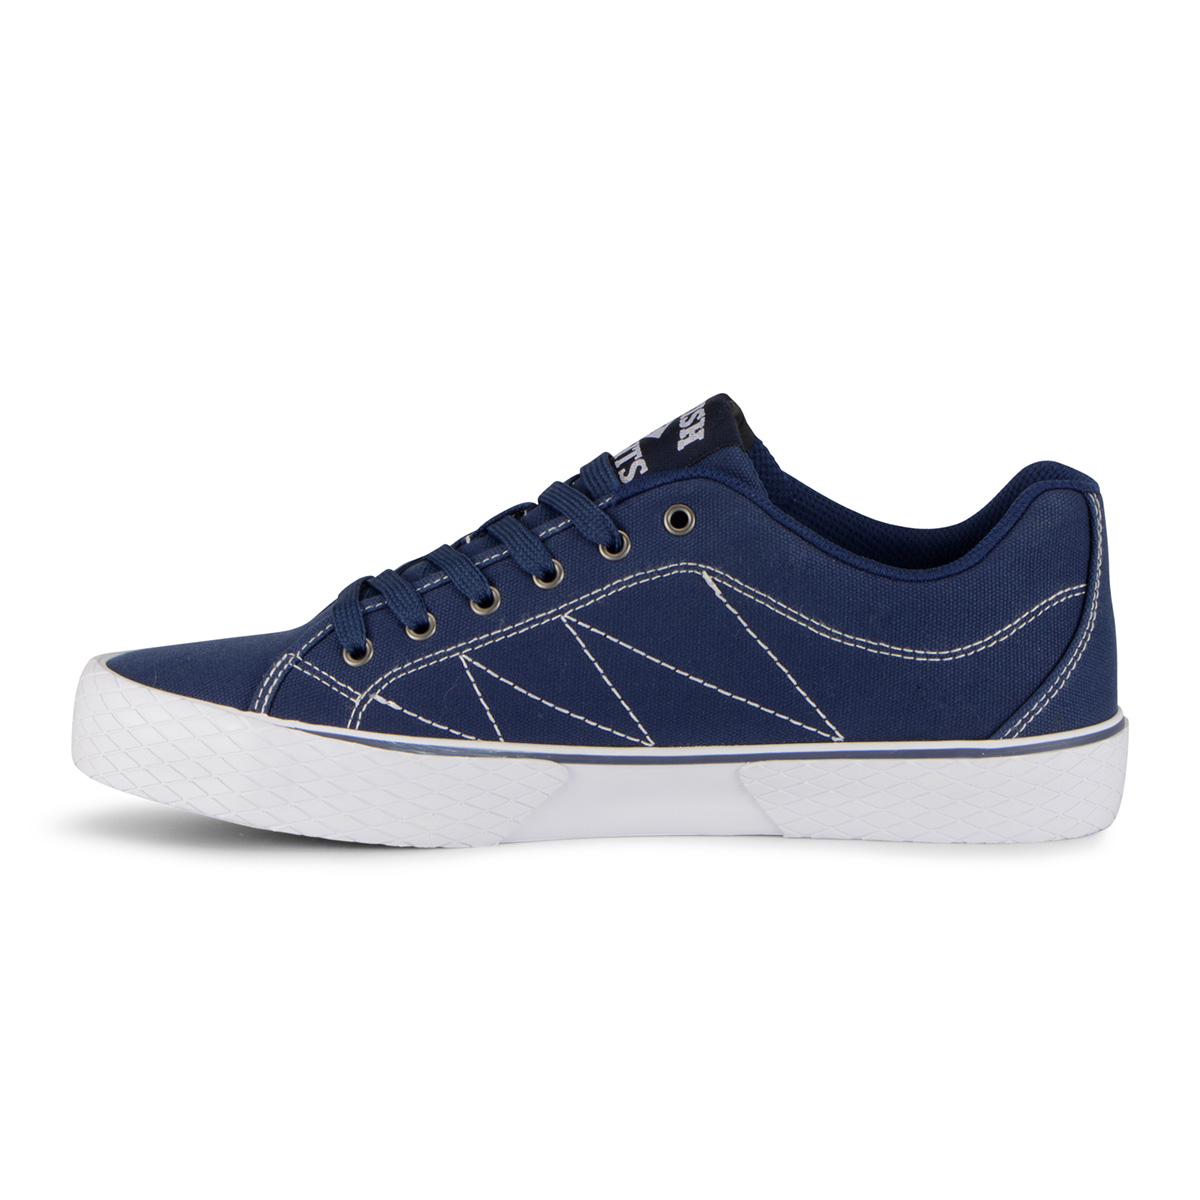 British Knights Men's Vulture 2 Canvas Sneaker Shoes - image 3 of 7